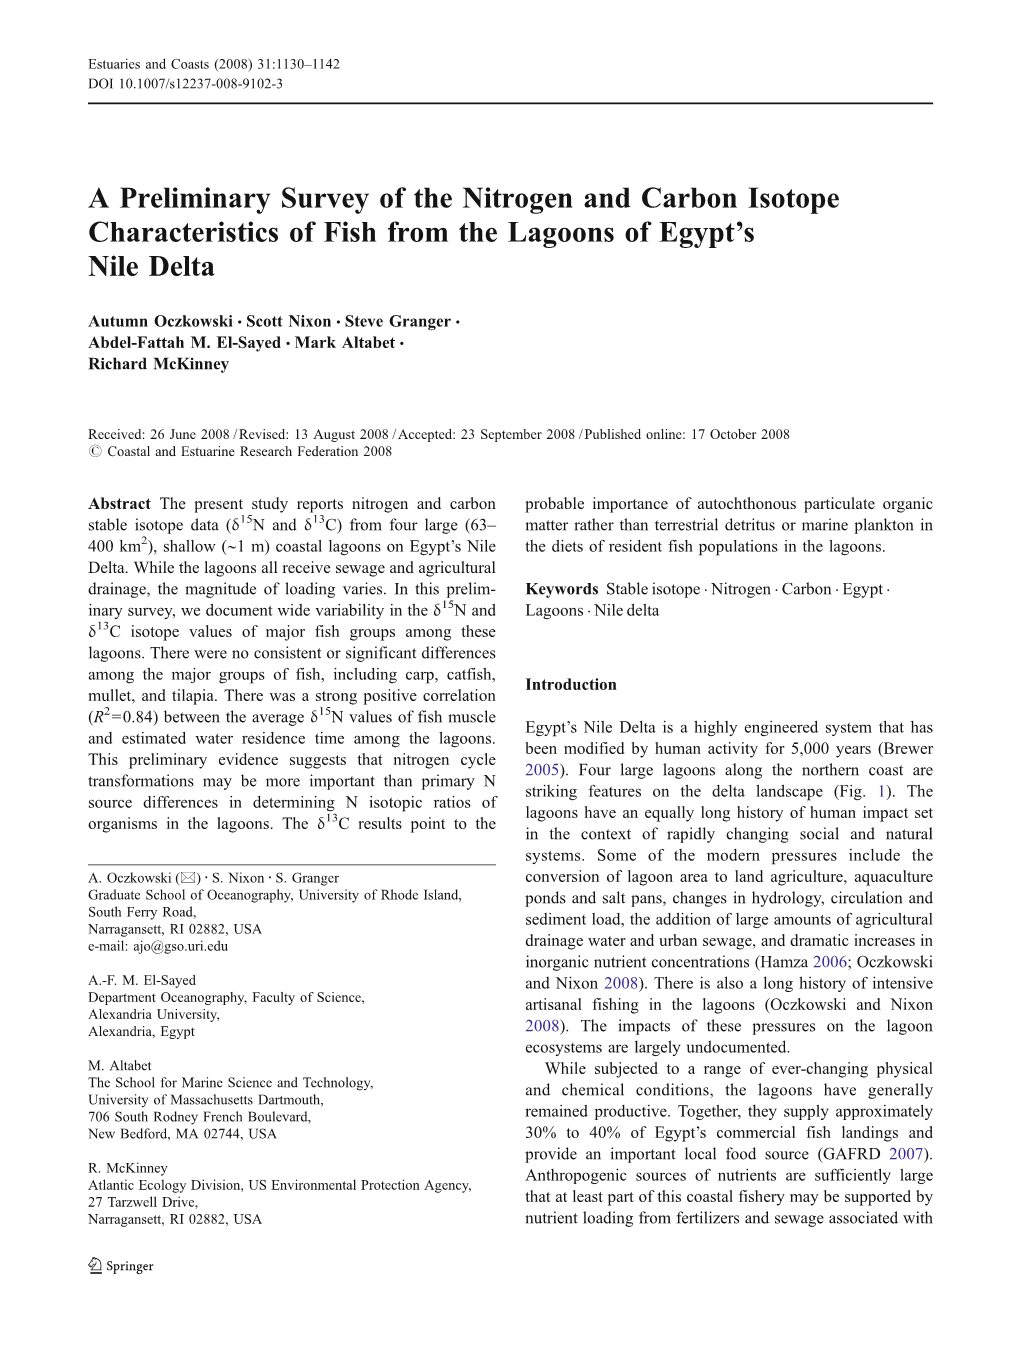 A Preliminary Survey of the Nitrogen and Carbon Isotope Characteristics of Fish from the Lagoons of Egypt’S Nile Delta